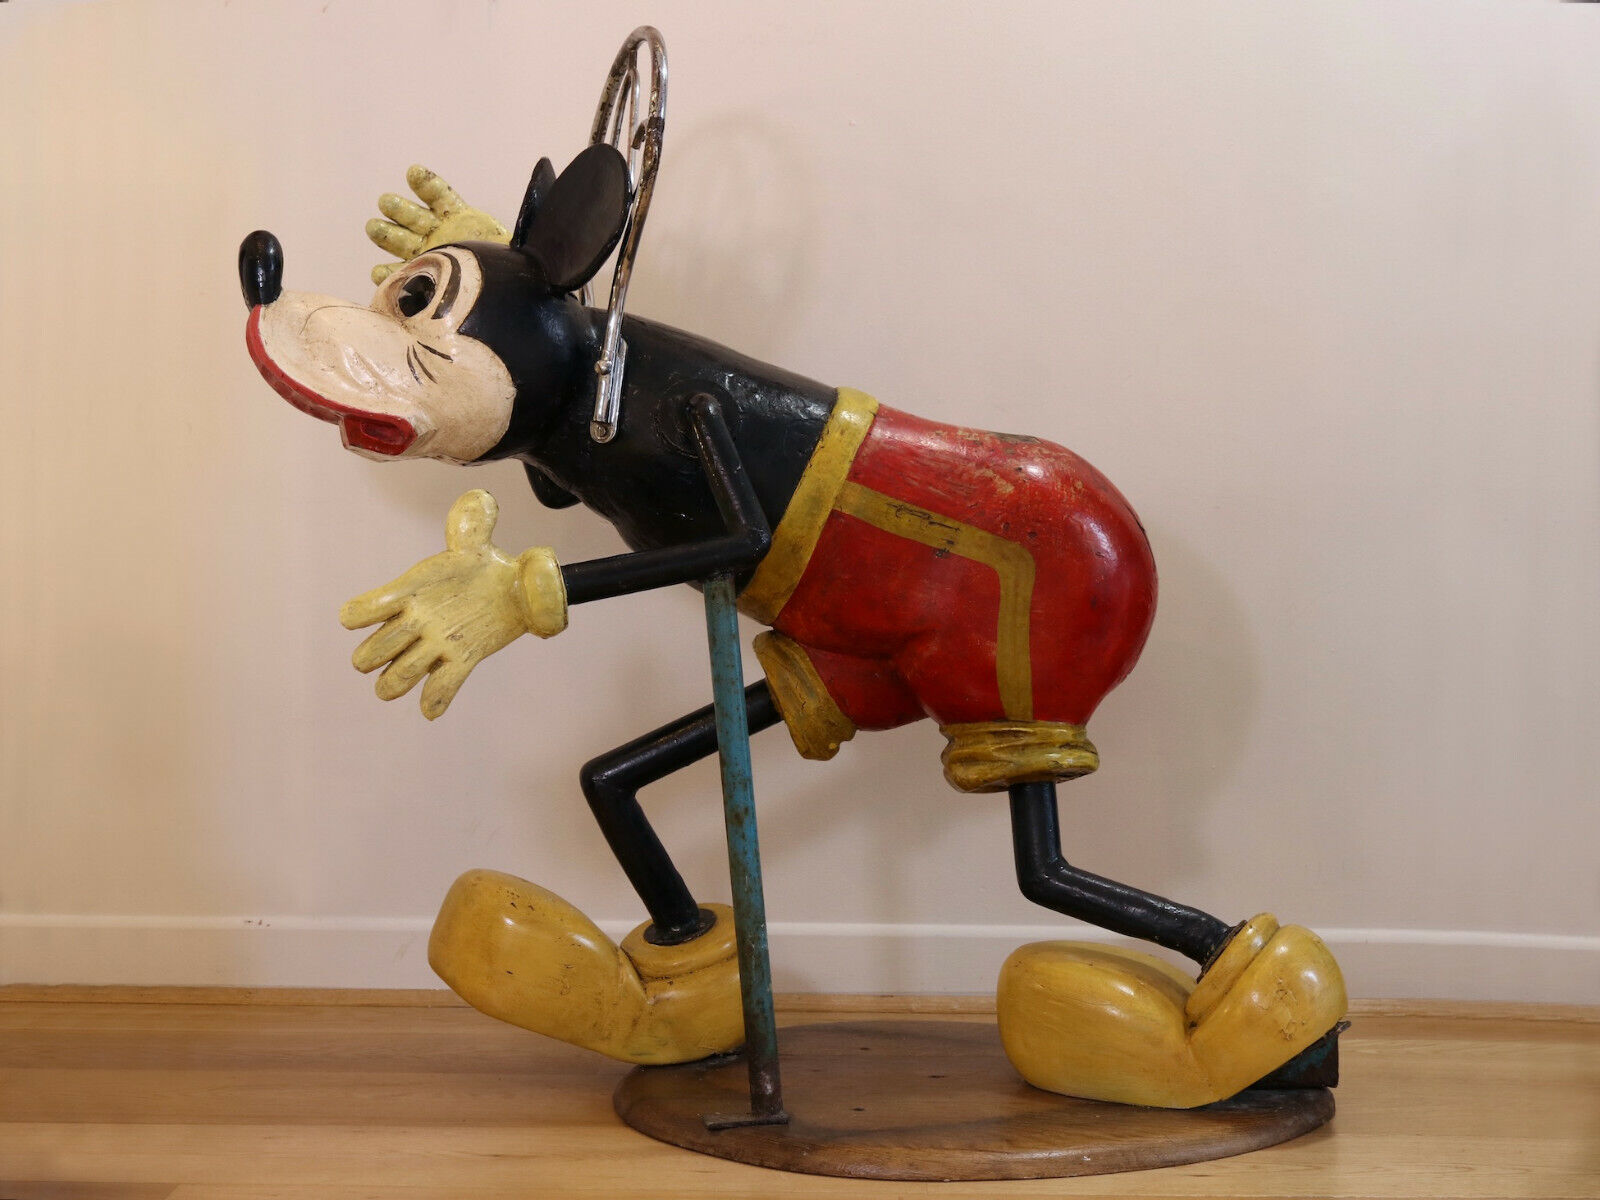 MICKEY MOUSE WALT DISNEY RARE VINTAGE  WOOD FIGURE  FOR CAROUSEL OF 1930 